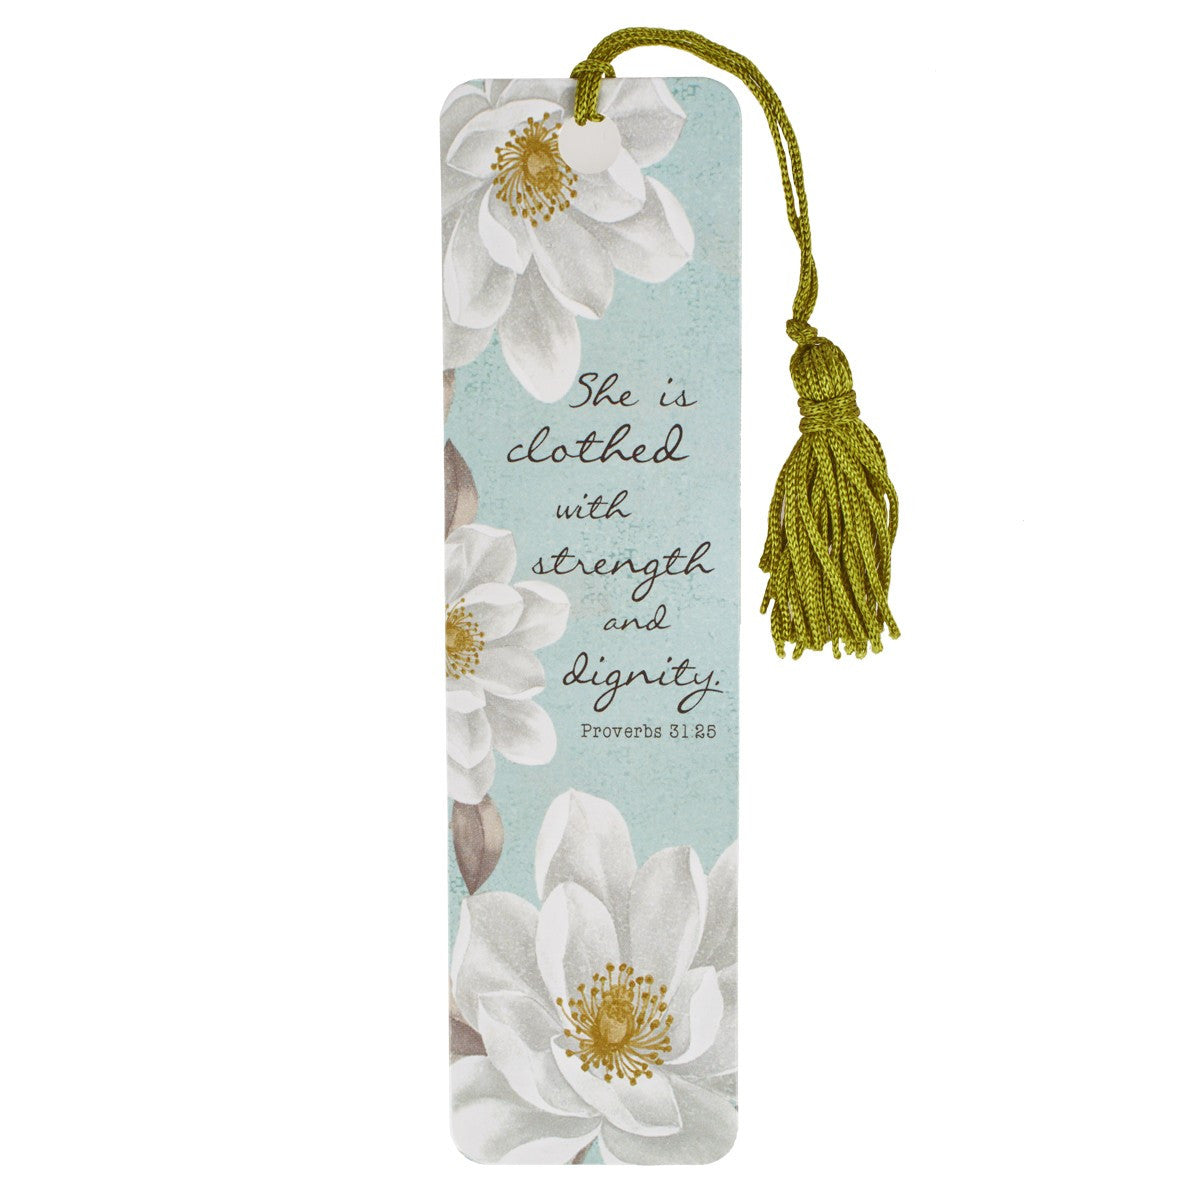 She Is Clothed with Strength and Dignity Bookmark with Tassel - Proverbs 31:25